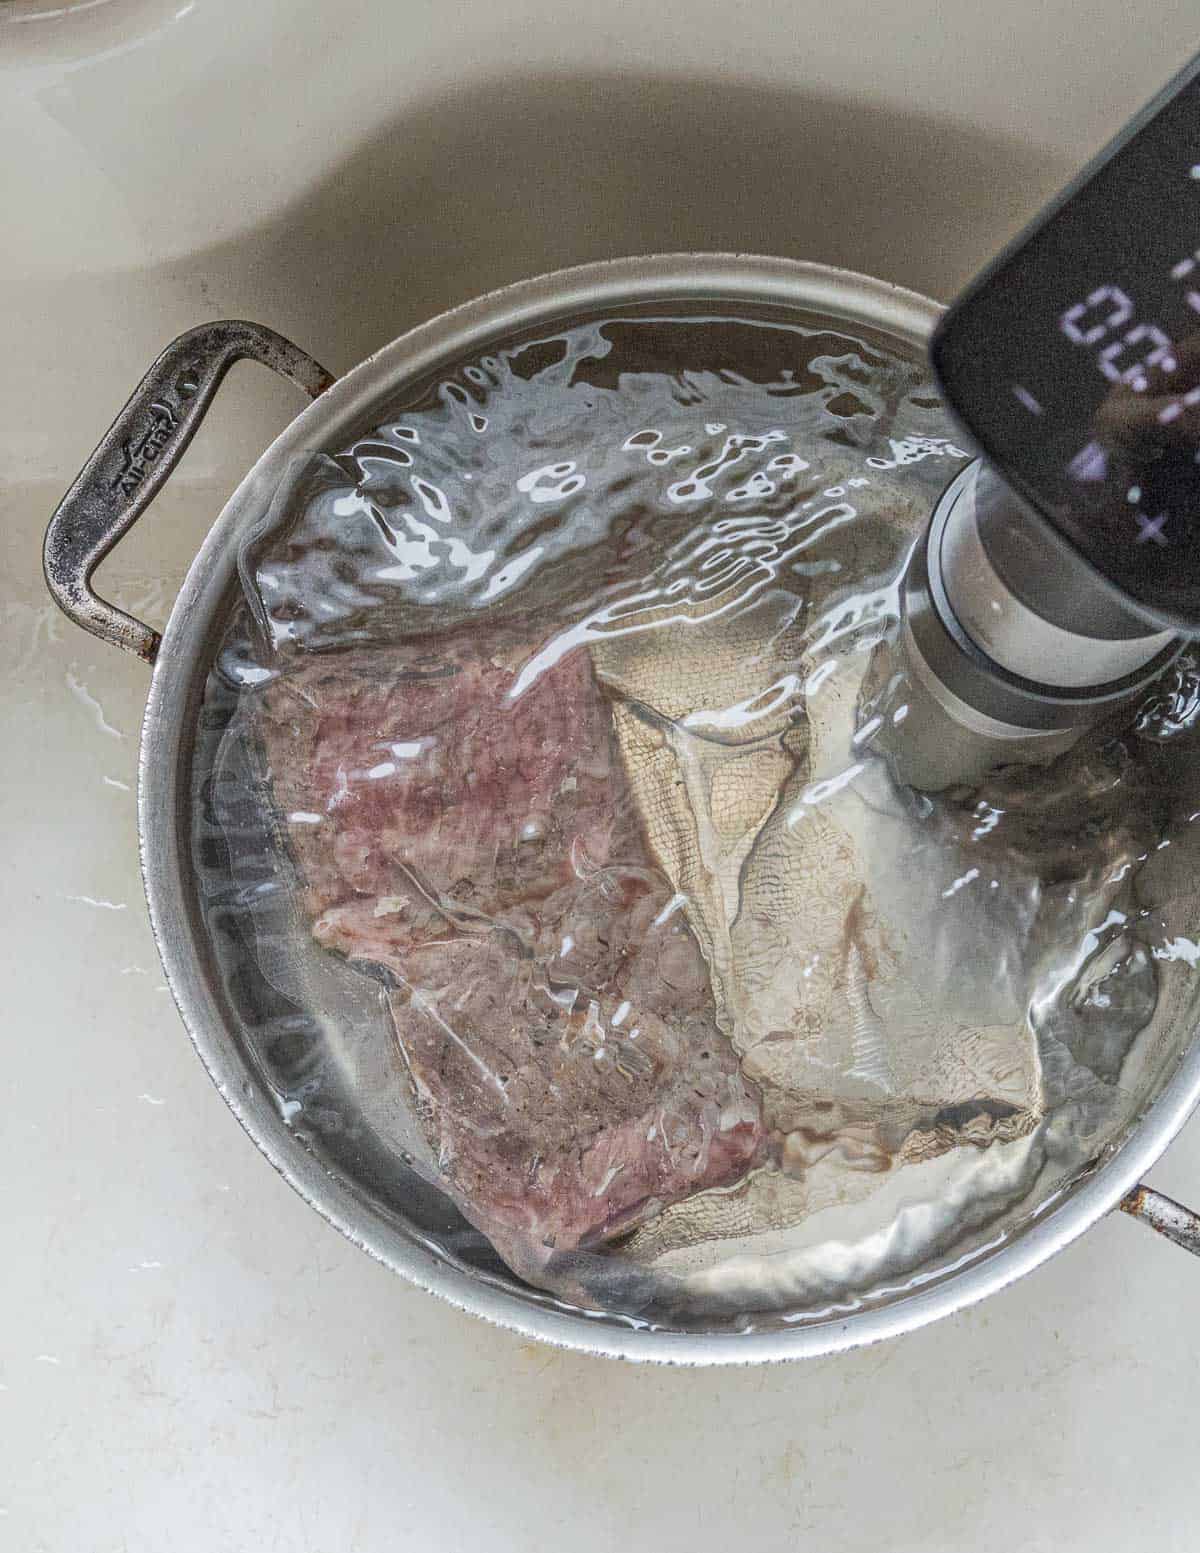 Cooking a wagyu steak sous vide.